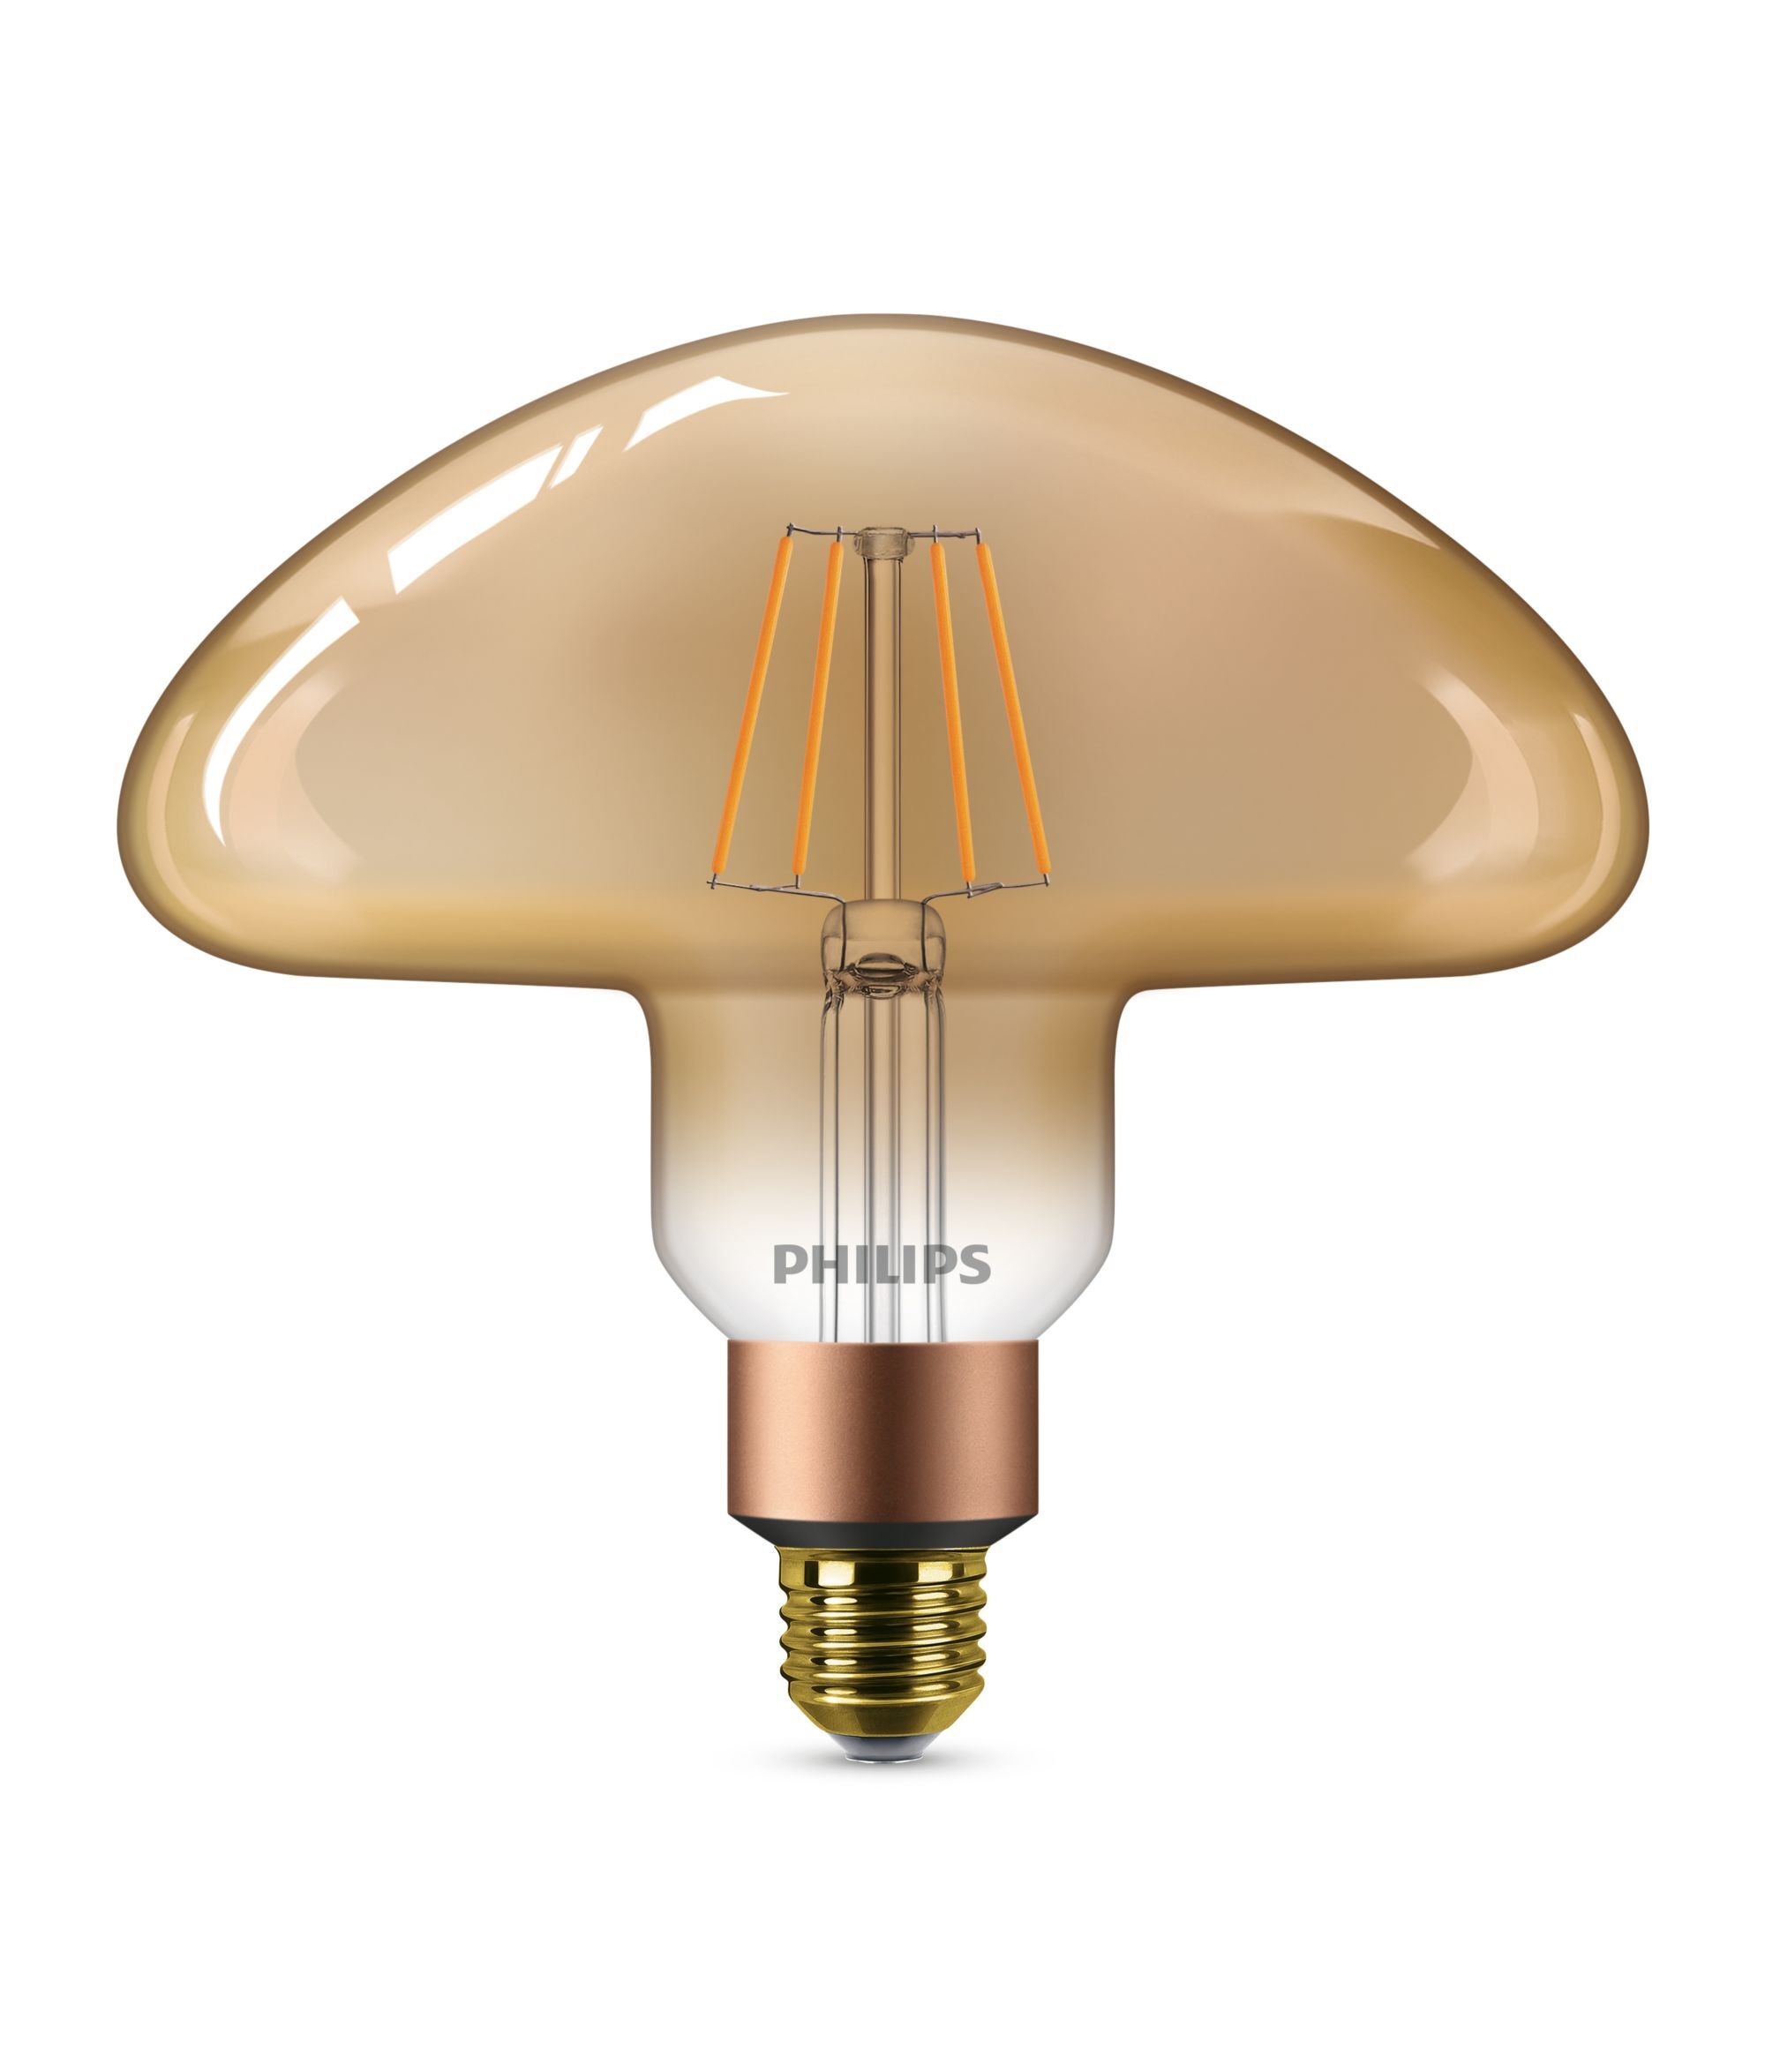 Philips 5 W (30 W) E27 Flame Dimming Bulb (Dimmable)